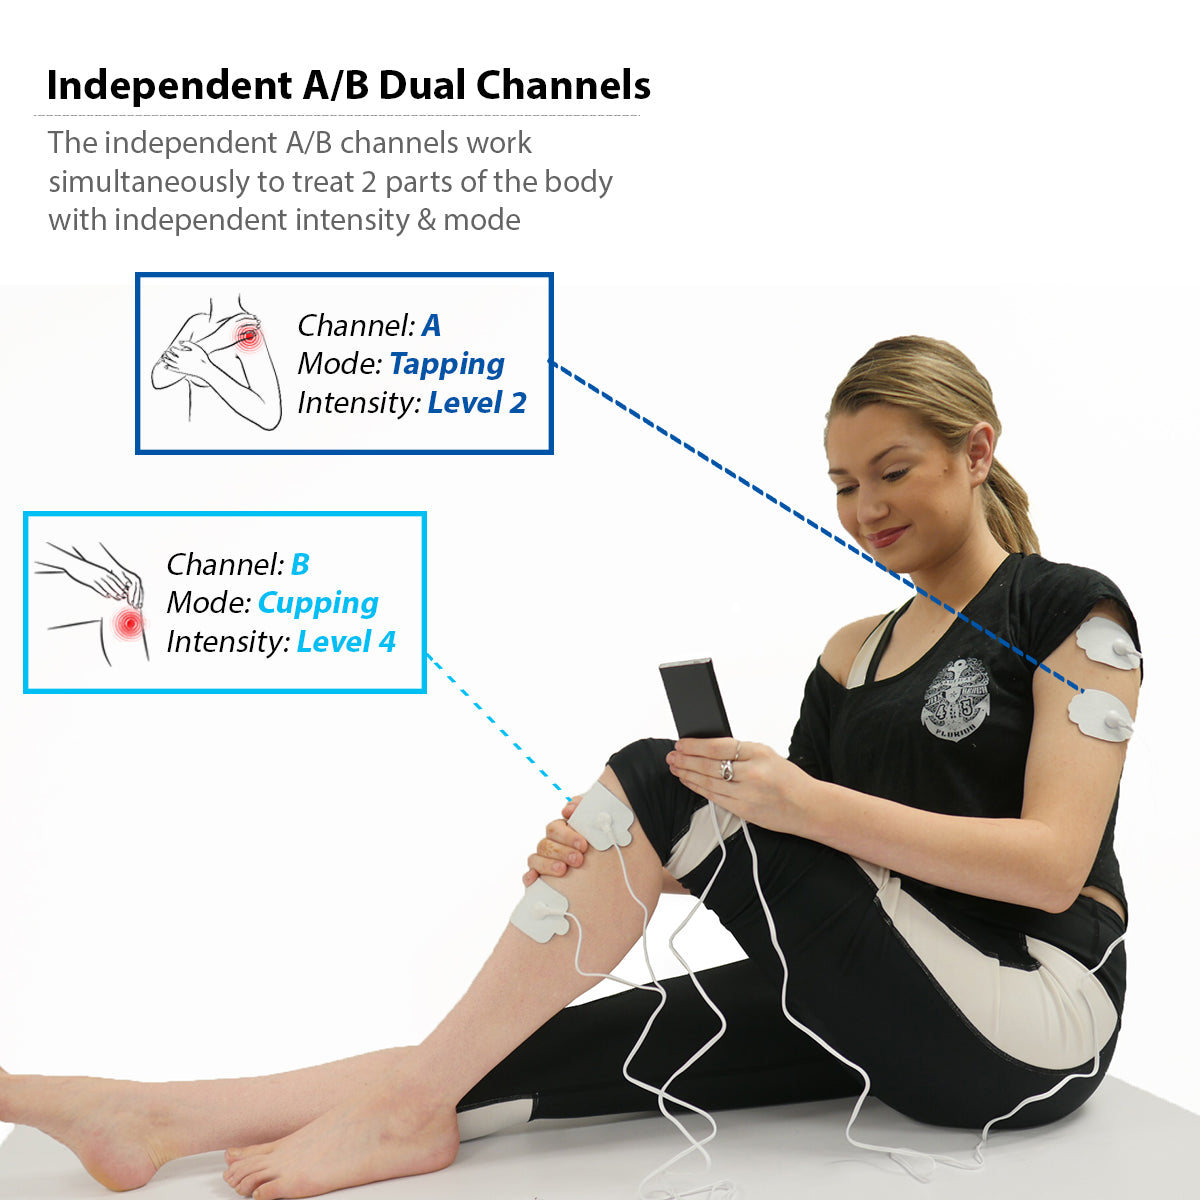 PRO15AB2 Pain Relief TENS Unit & Muscle Stimulator - 2 Year Warranty